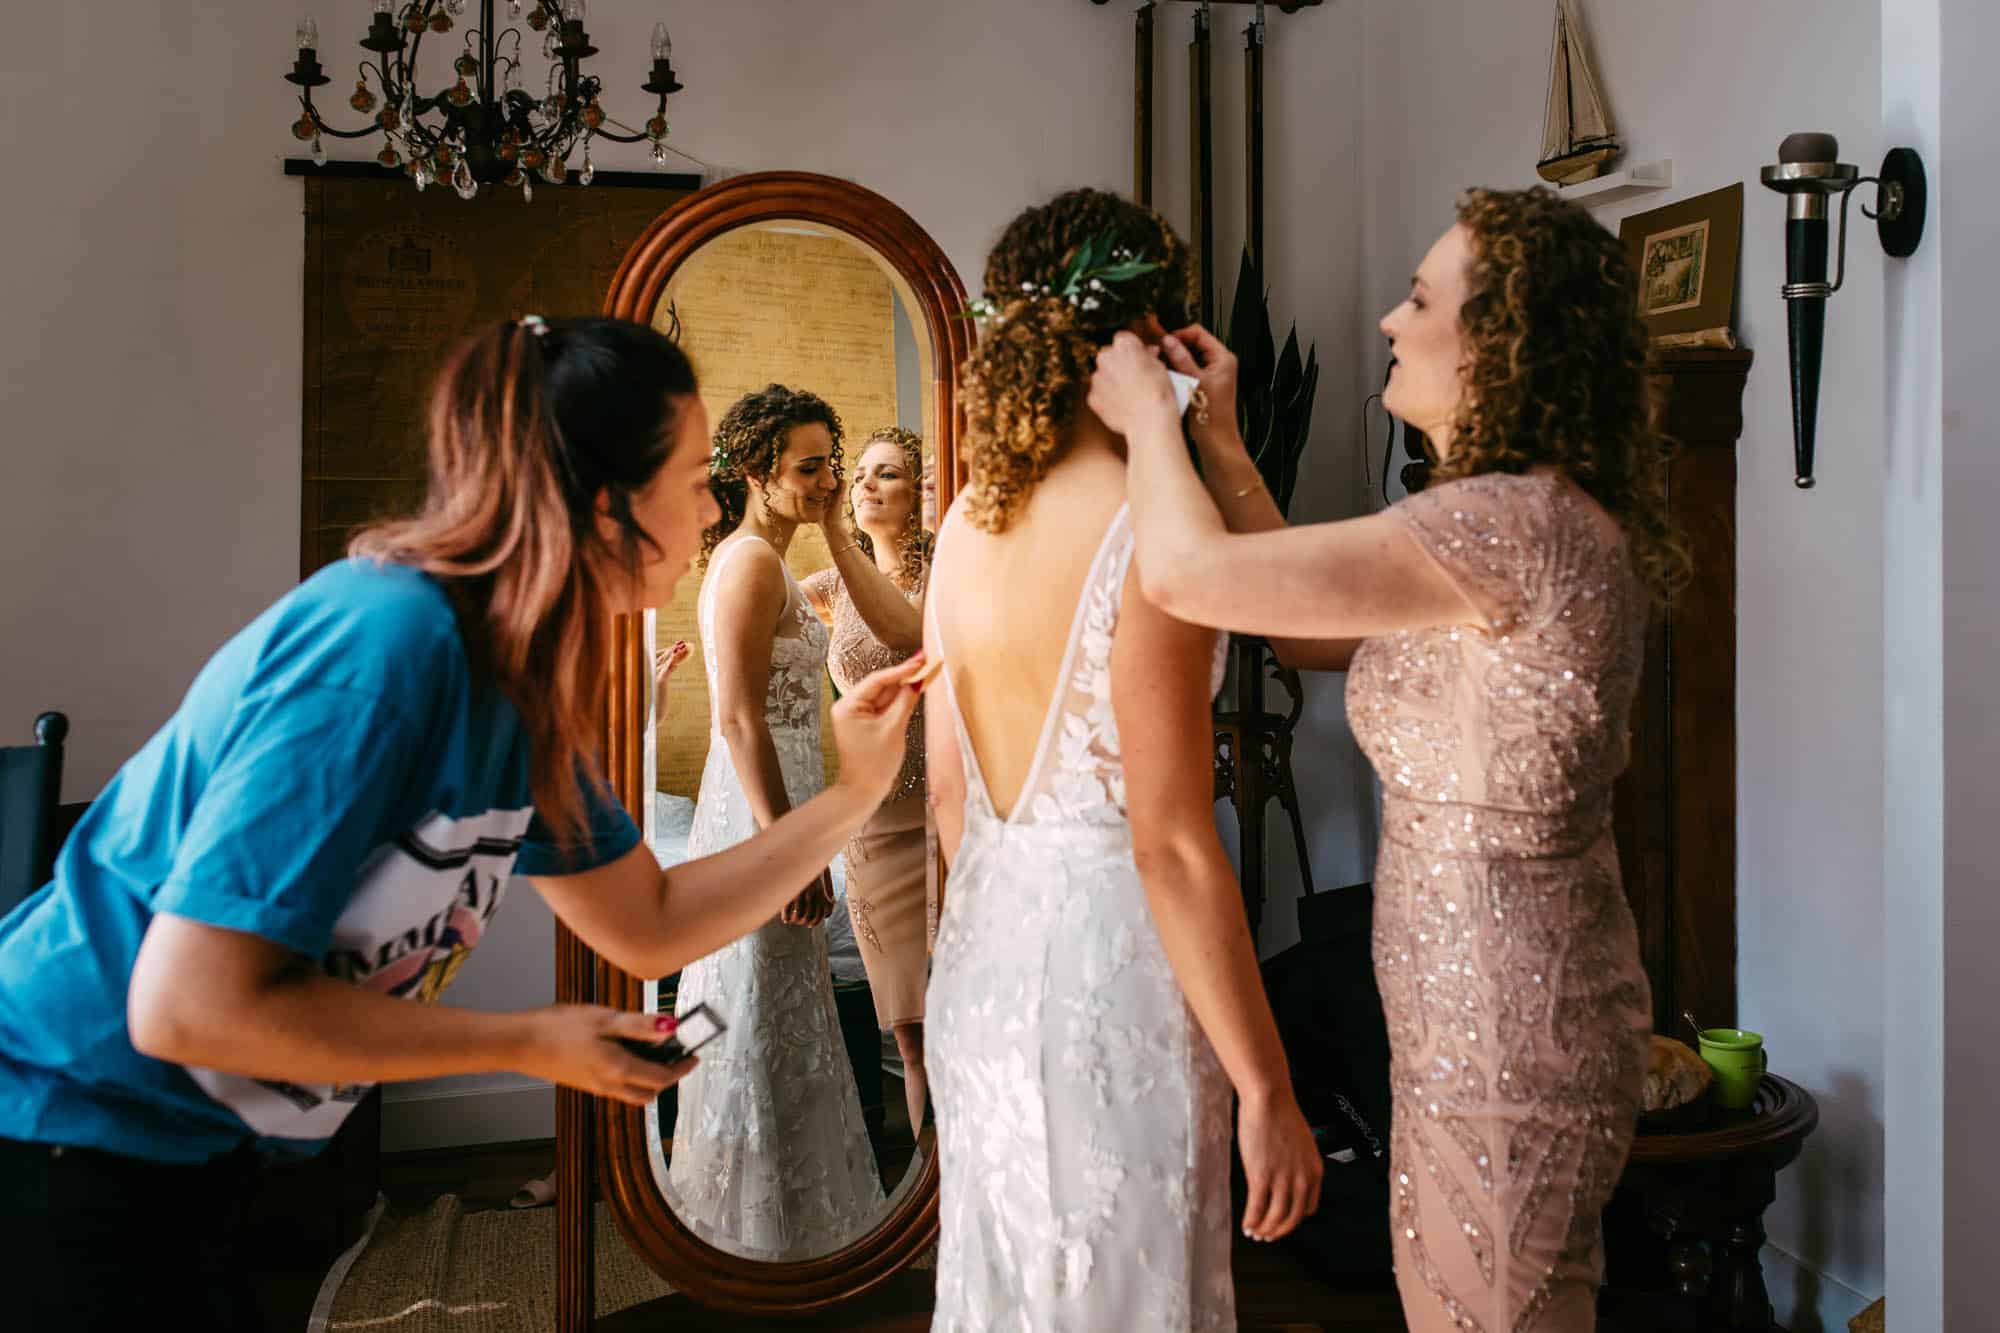 A bohemian bride getting ready in front of the mirror, dressed in a beautiful wedding dress.